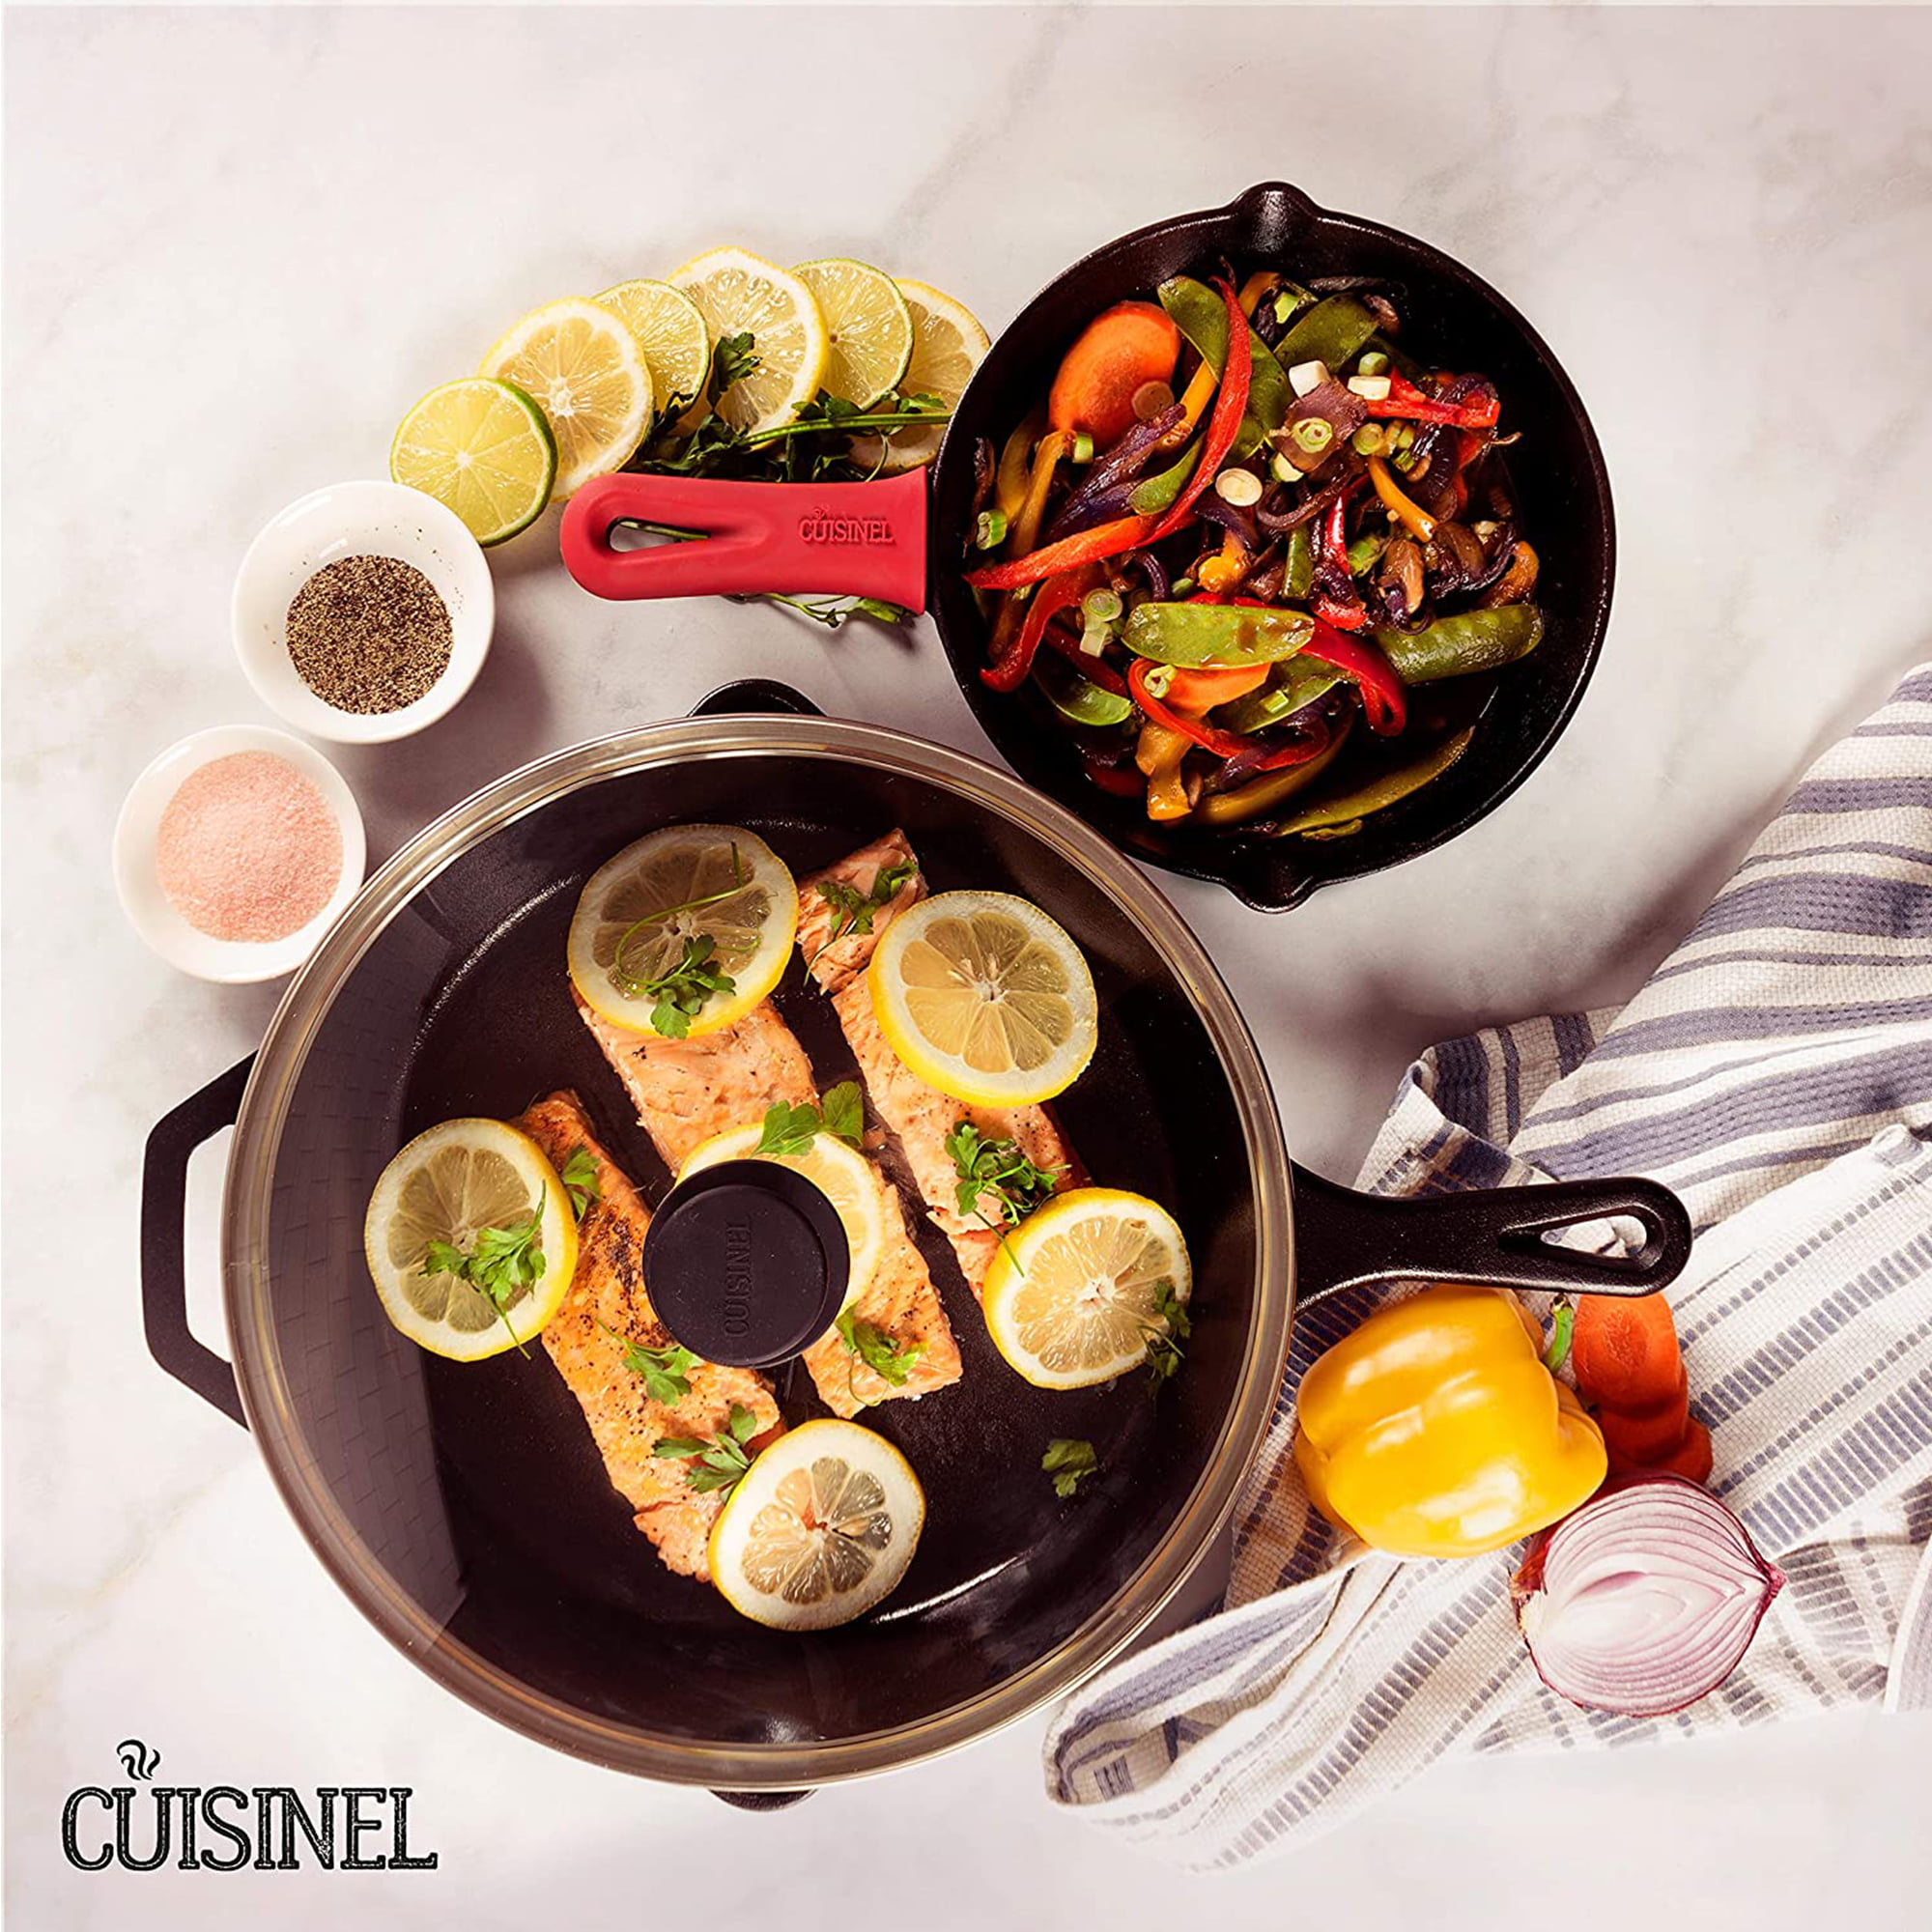 Finally go cast iron with Cuisinel cookware and accessories from $18.50